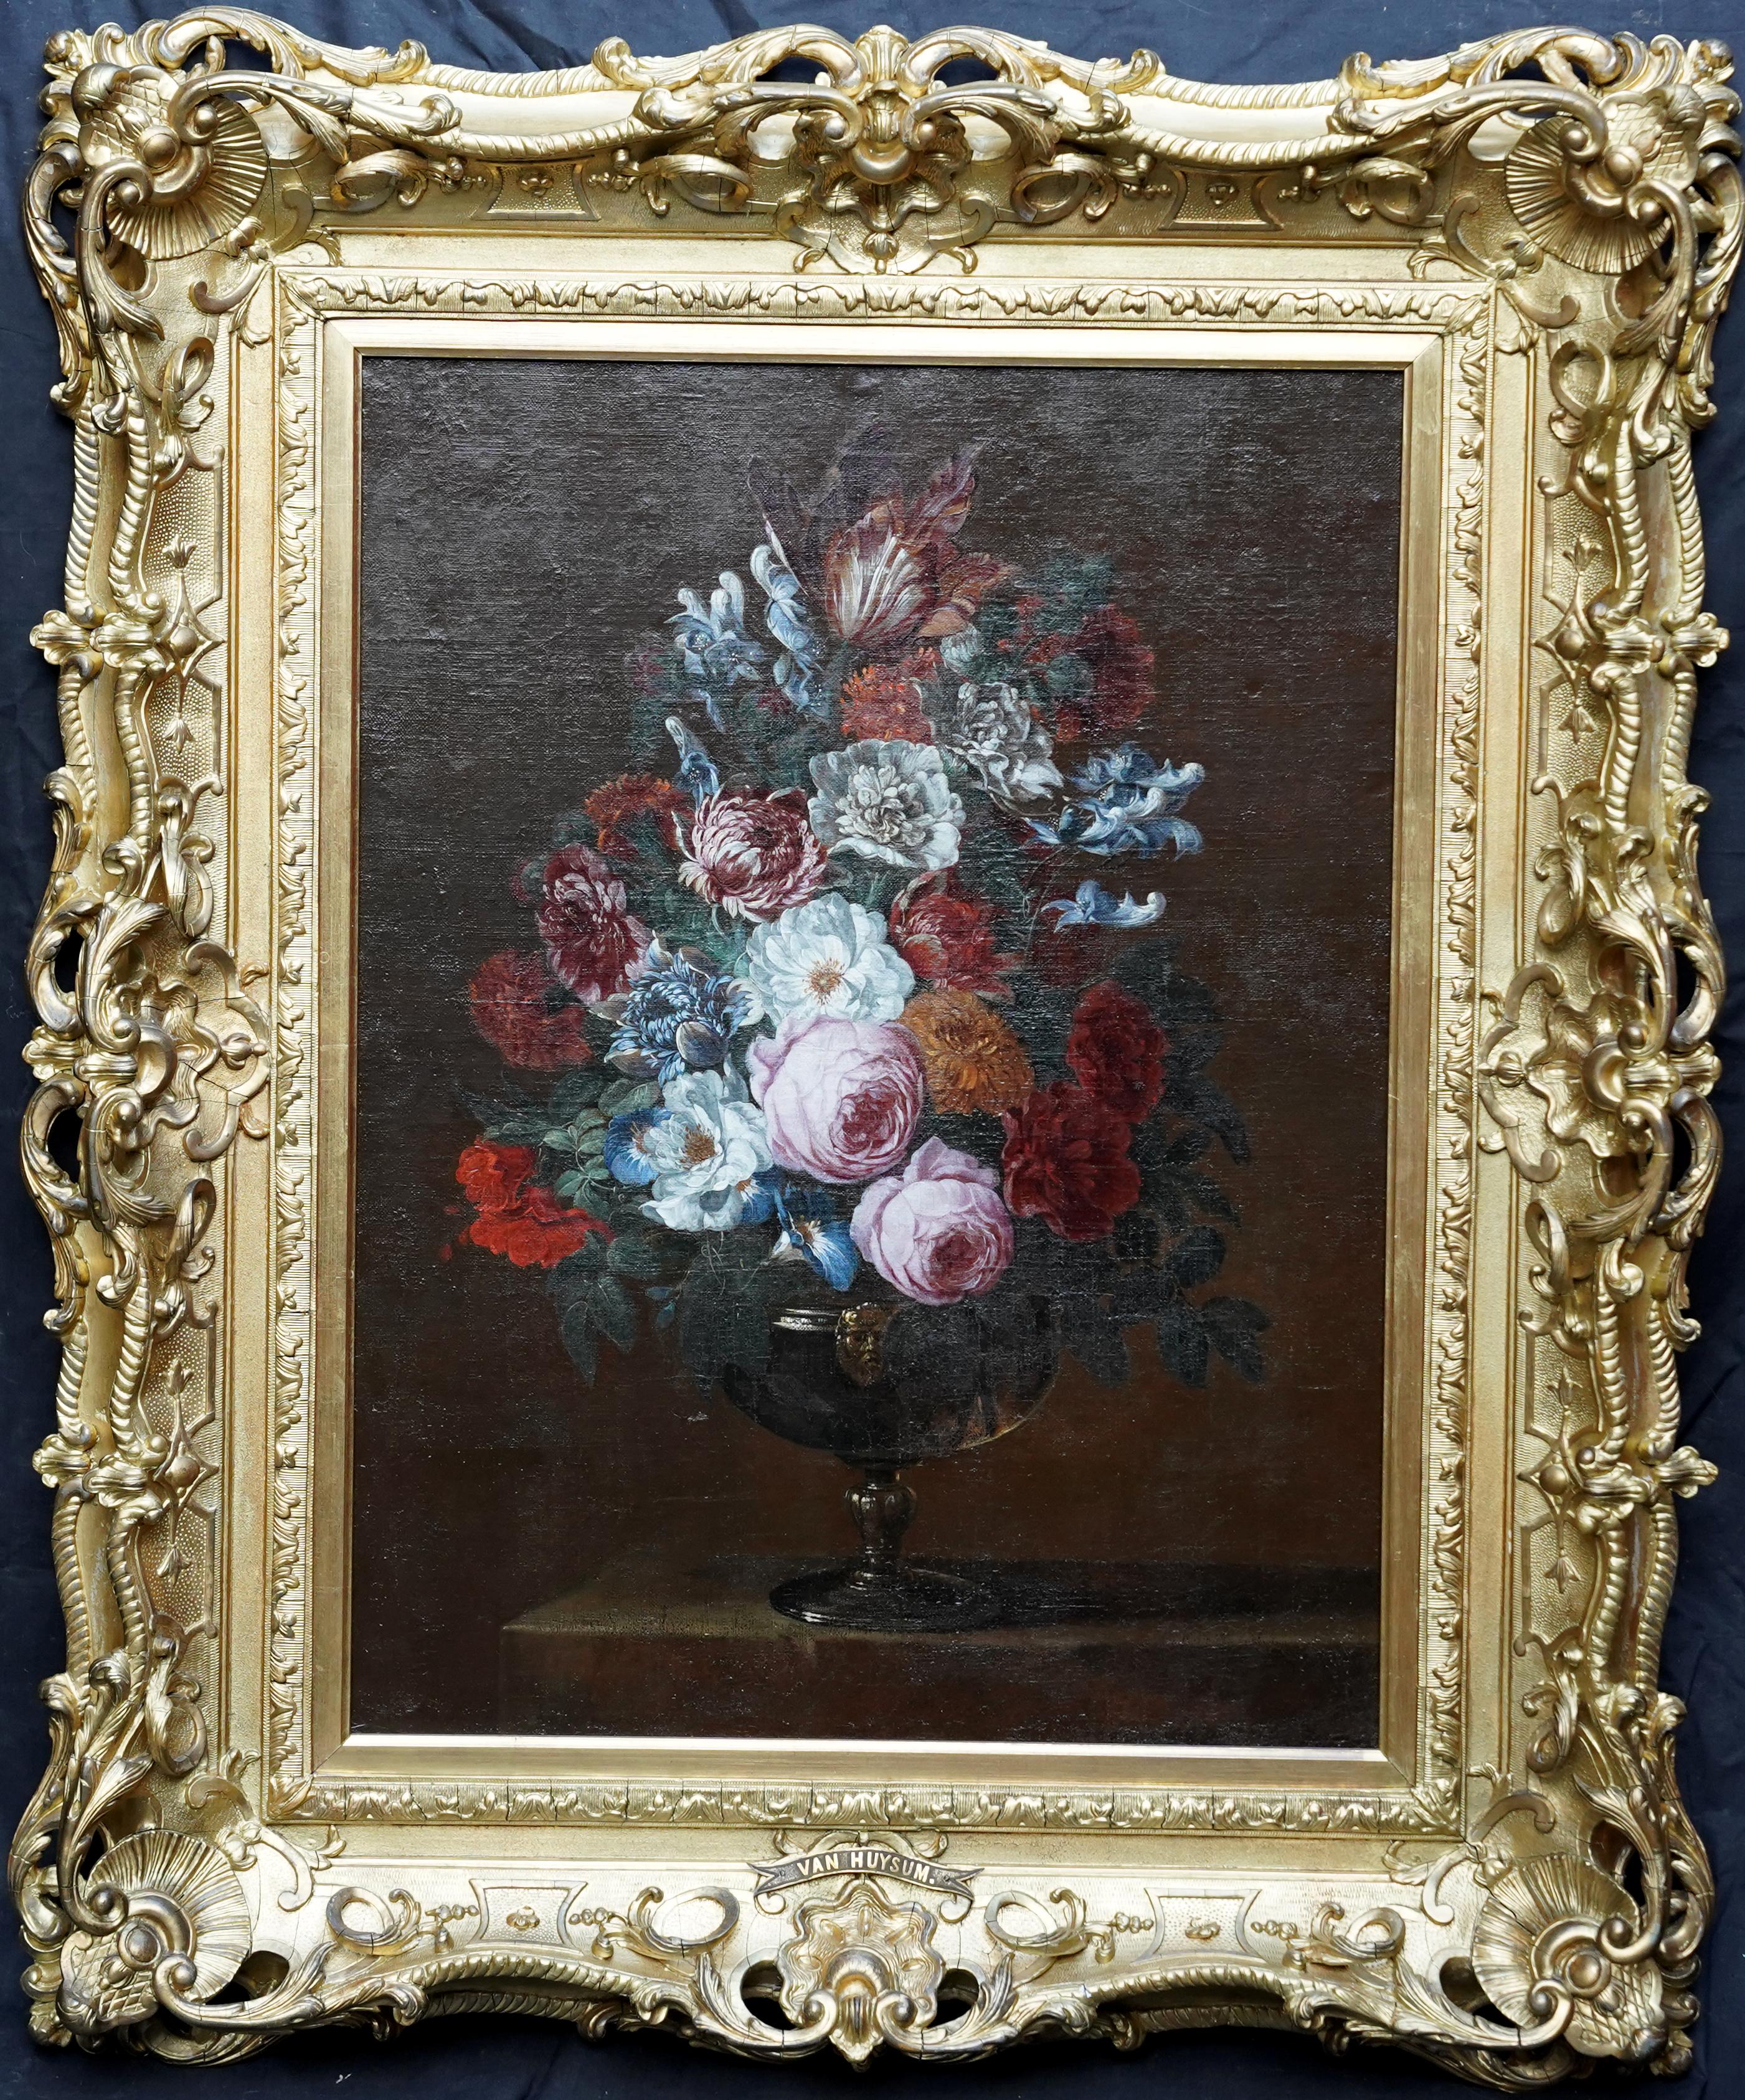 Floral Bouquet with Peonies -Dutch Golden Age art floral still life oil painting 4